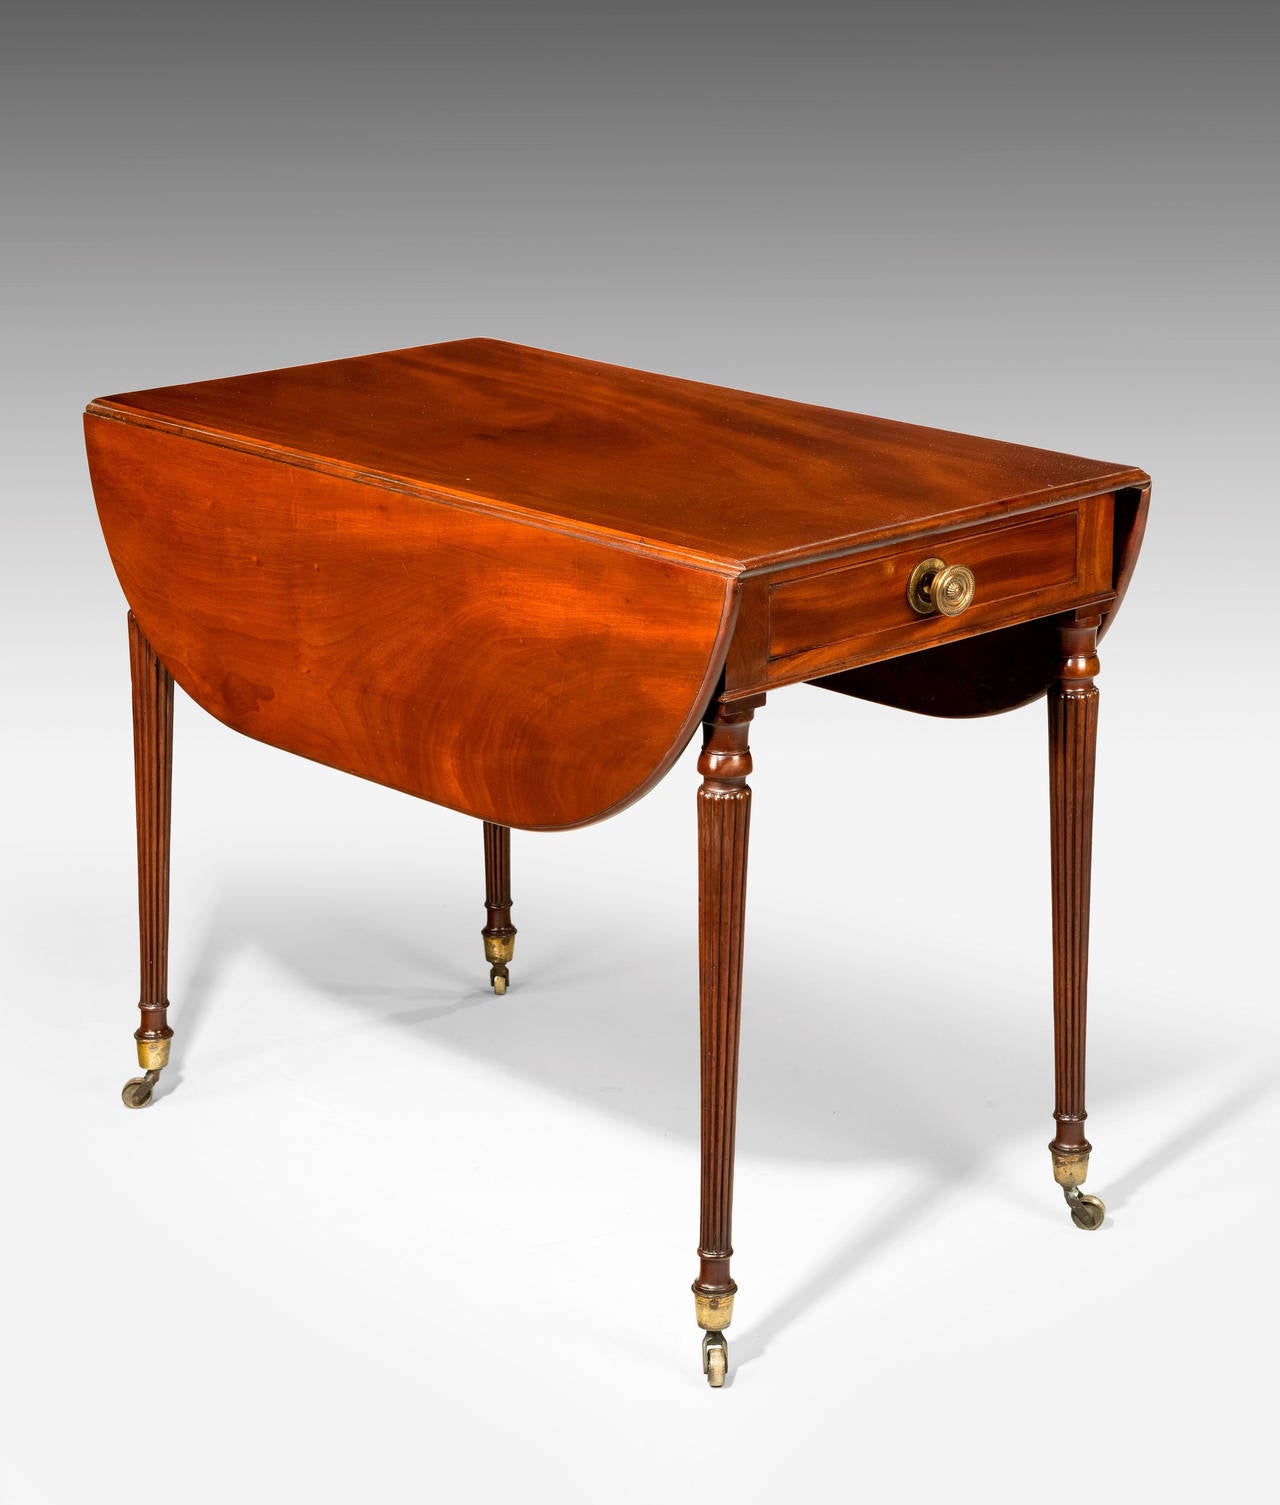 An elegant Regency period mahogany Pembroke table on finely reeded and turned supports, retaining original shoes and casters. Oval shaped with fully open.

Closed dimensions - 19.75 inches.